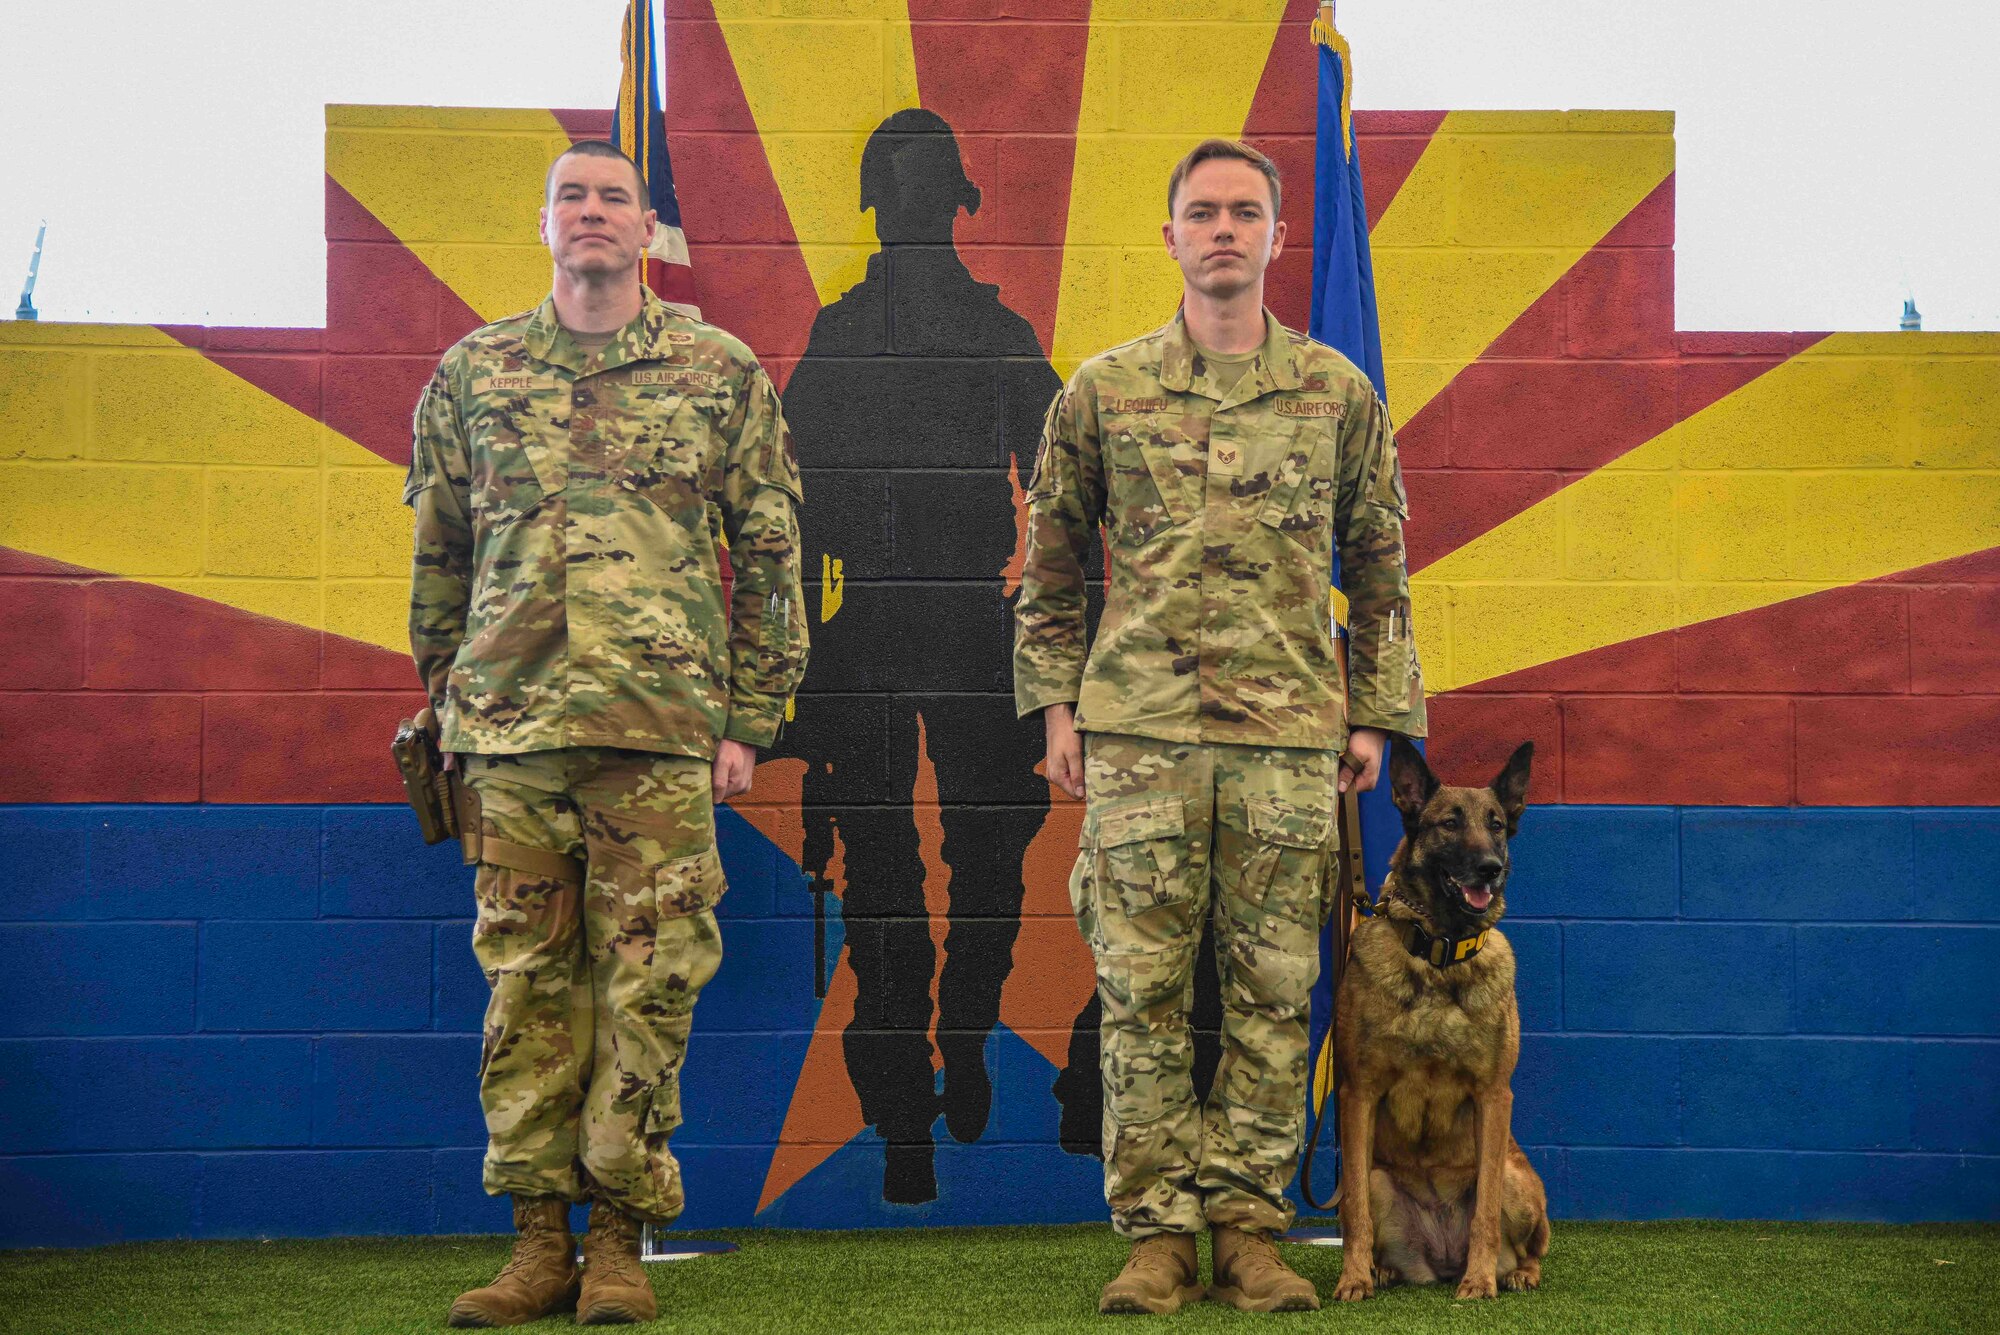 Pictured above are two Airman standing at attention during a ceremony.